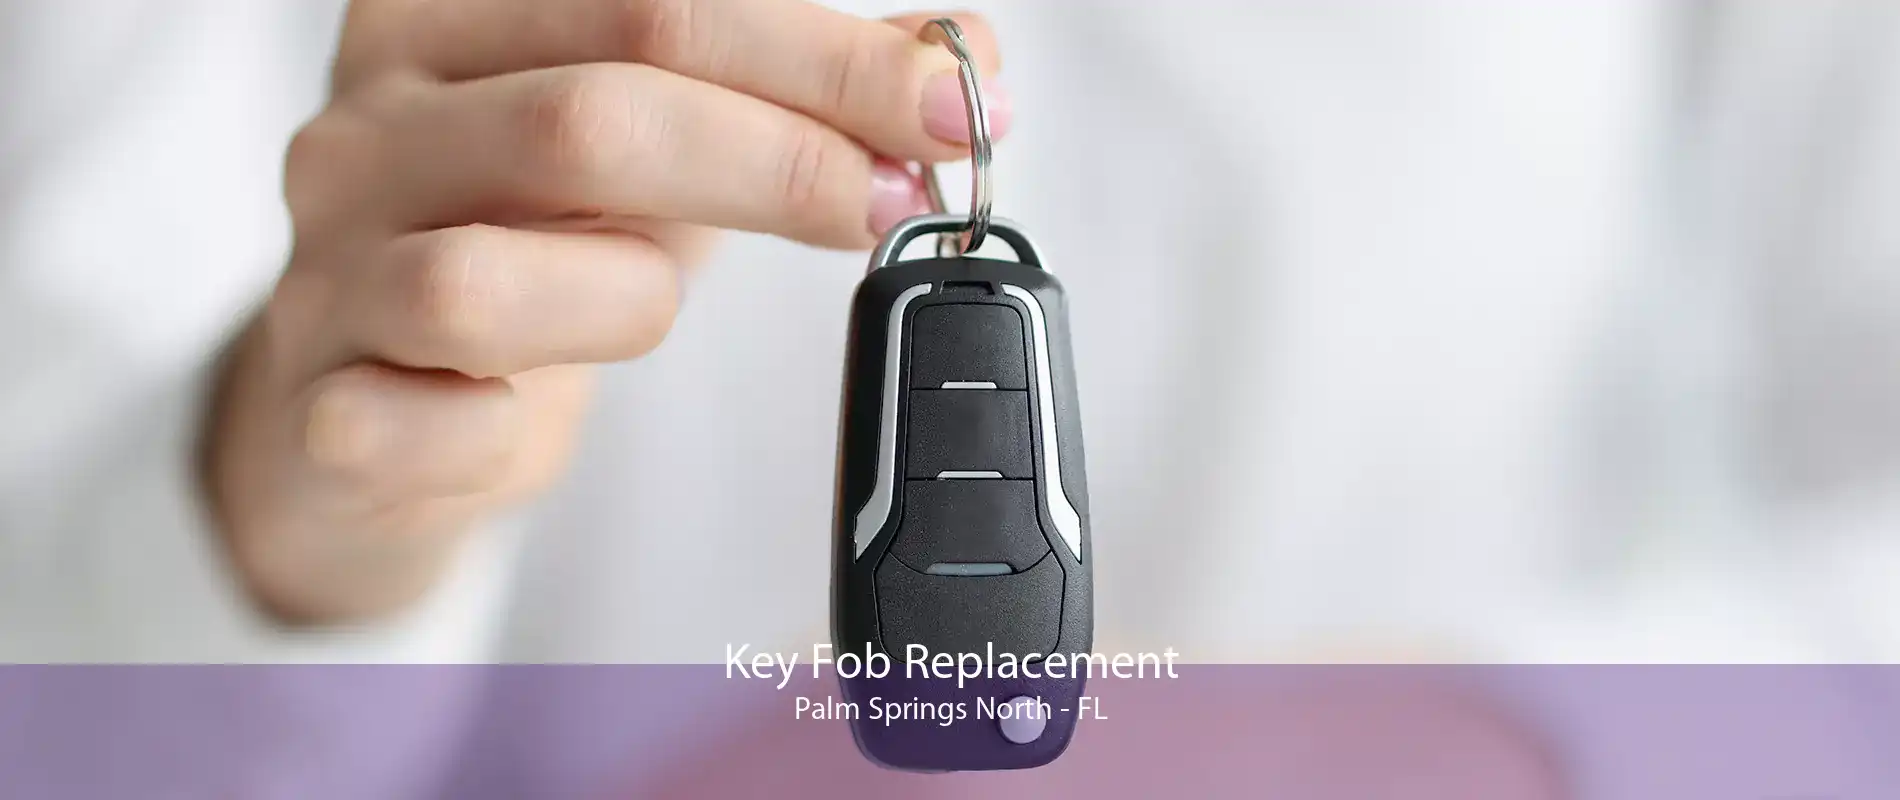 Key Fob Replacement Palm Springs North - FL